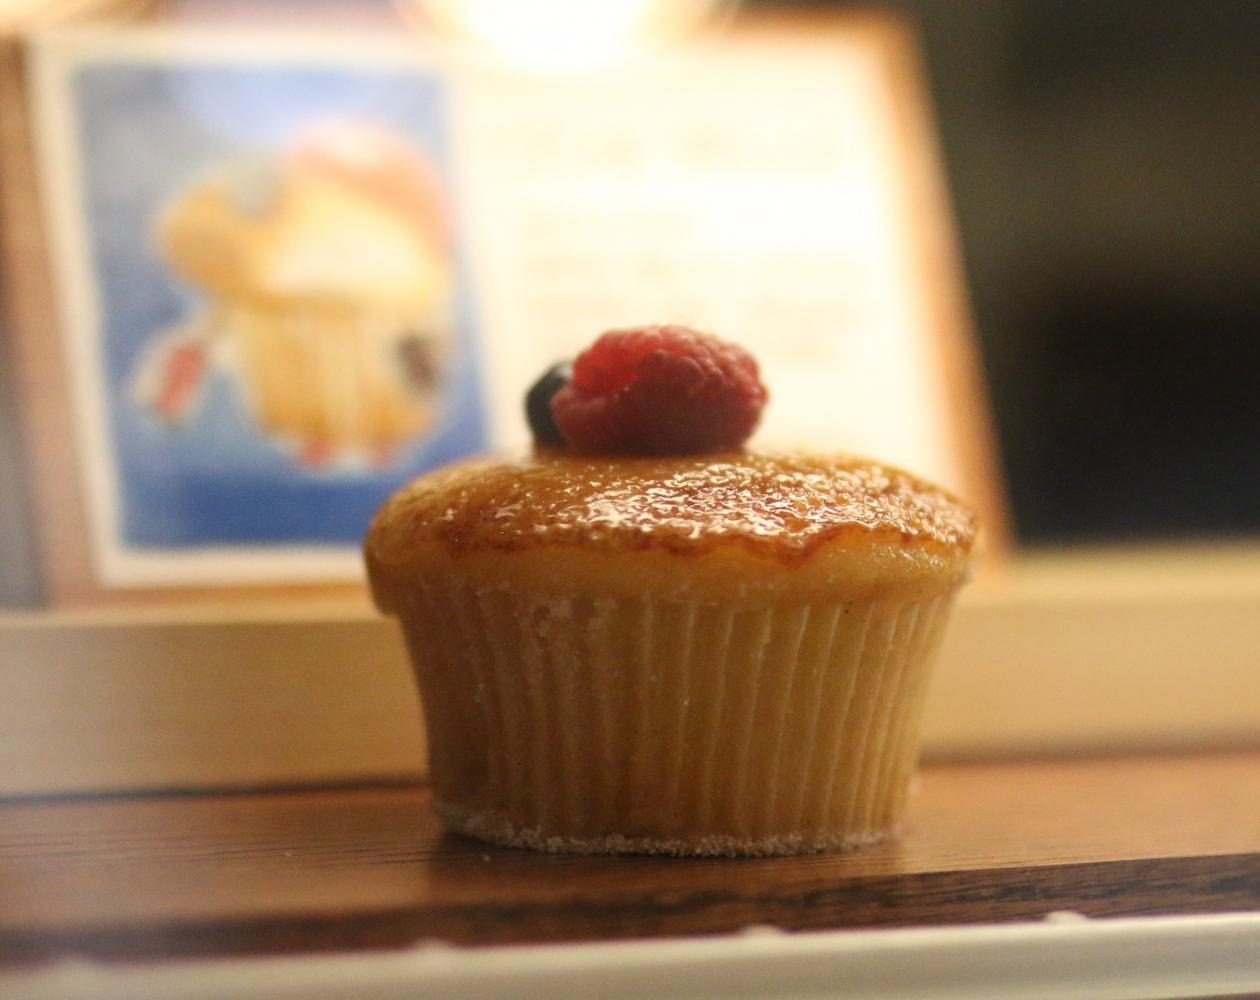 Behind each cupcake in the display case is a small, hand-drawn image which represents that specific variety of cupcake.